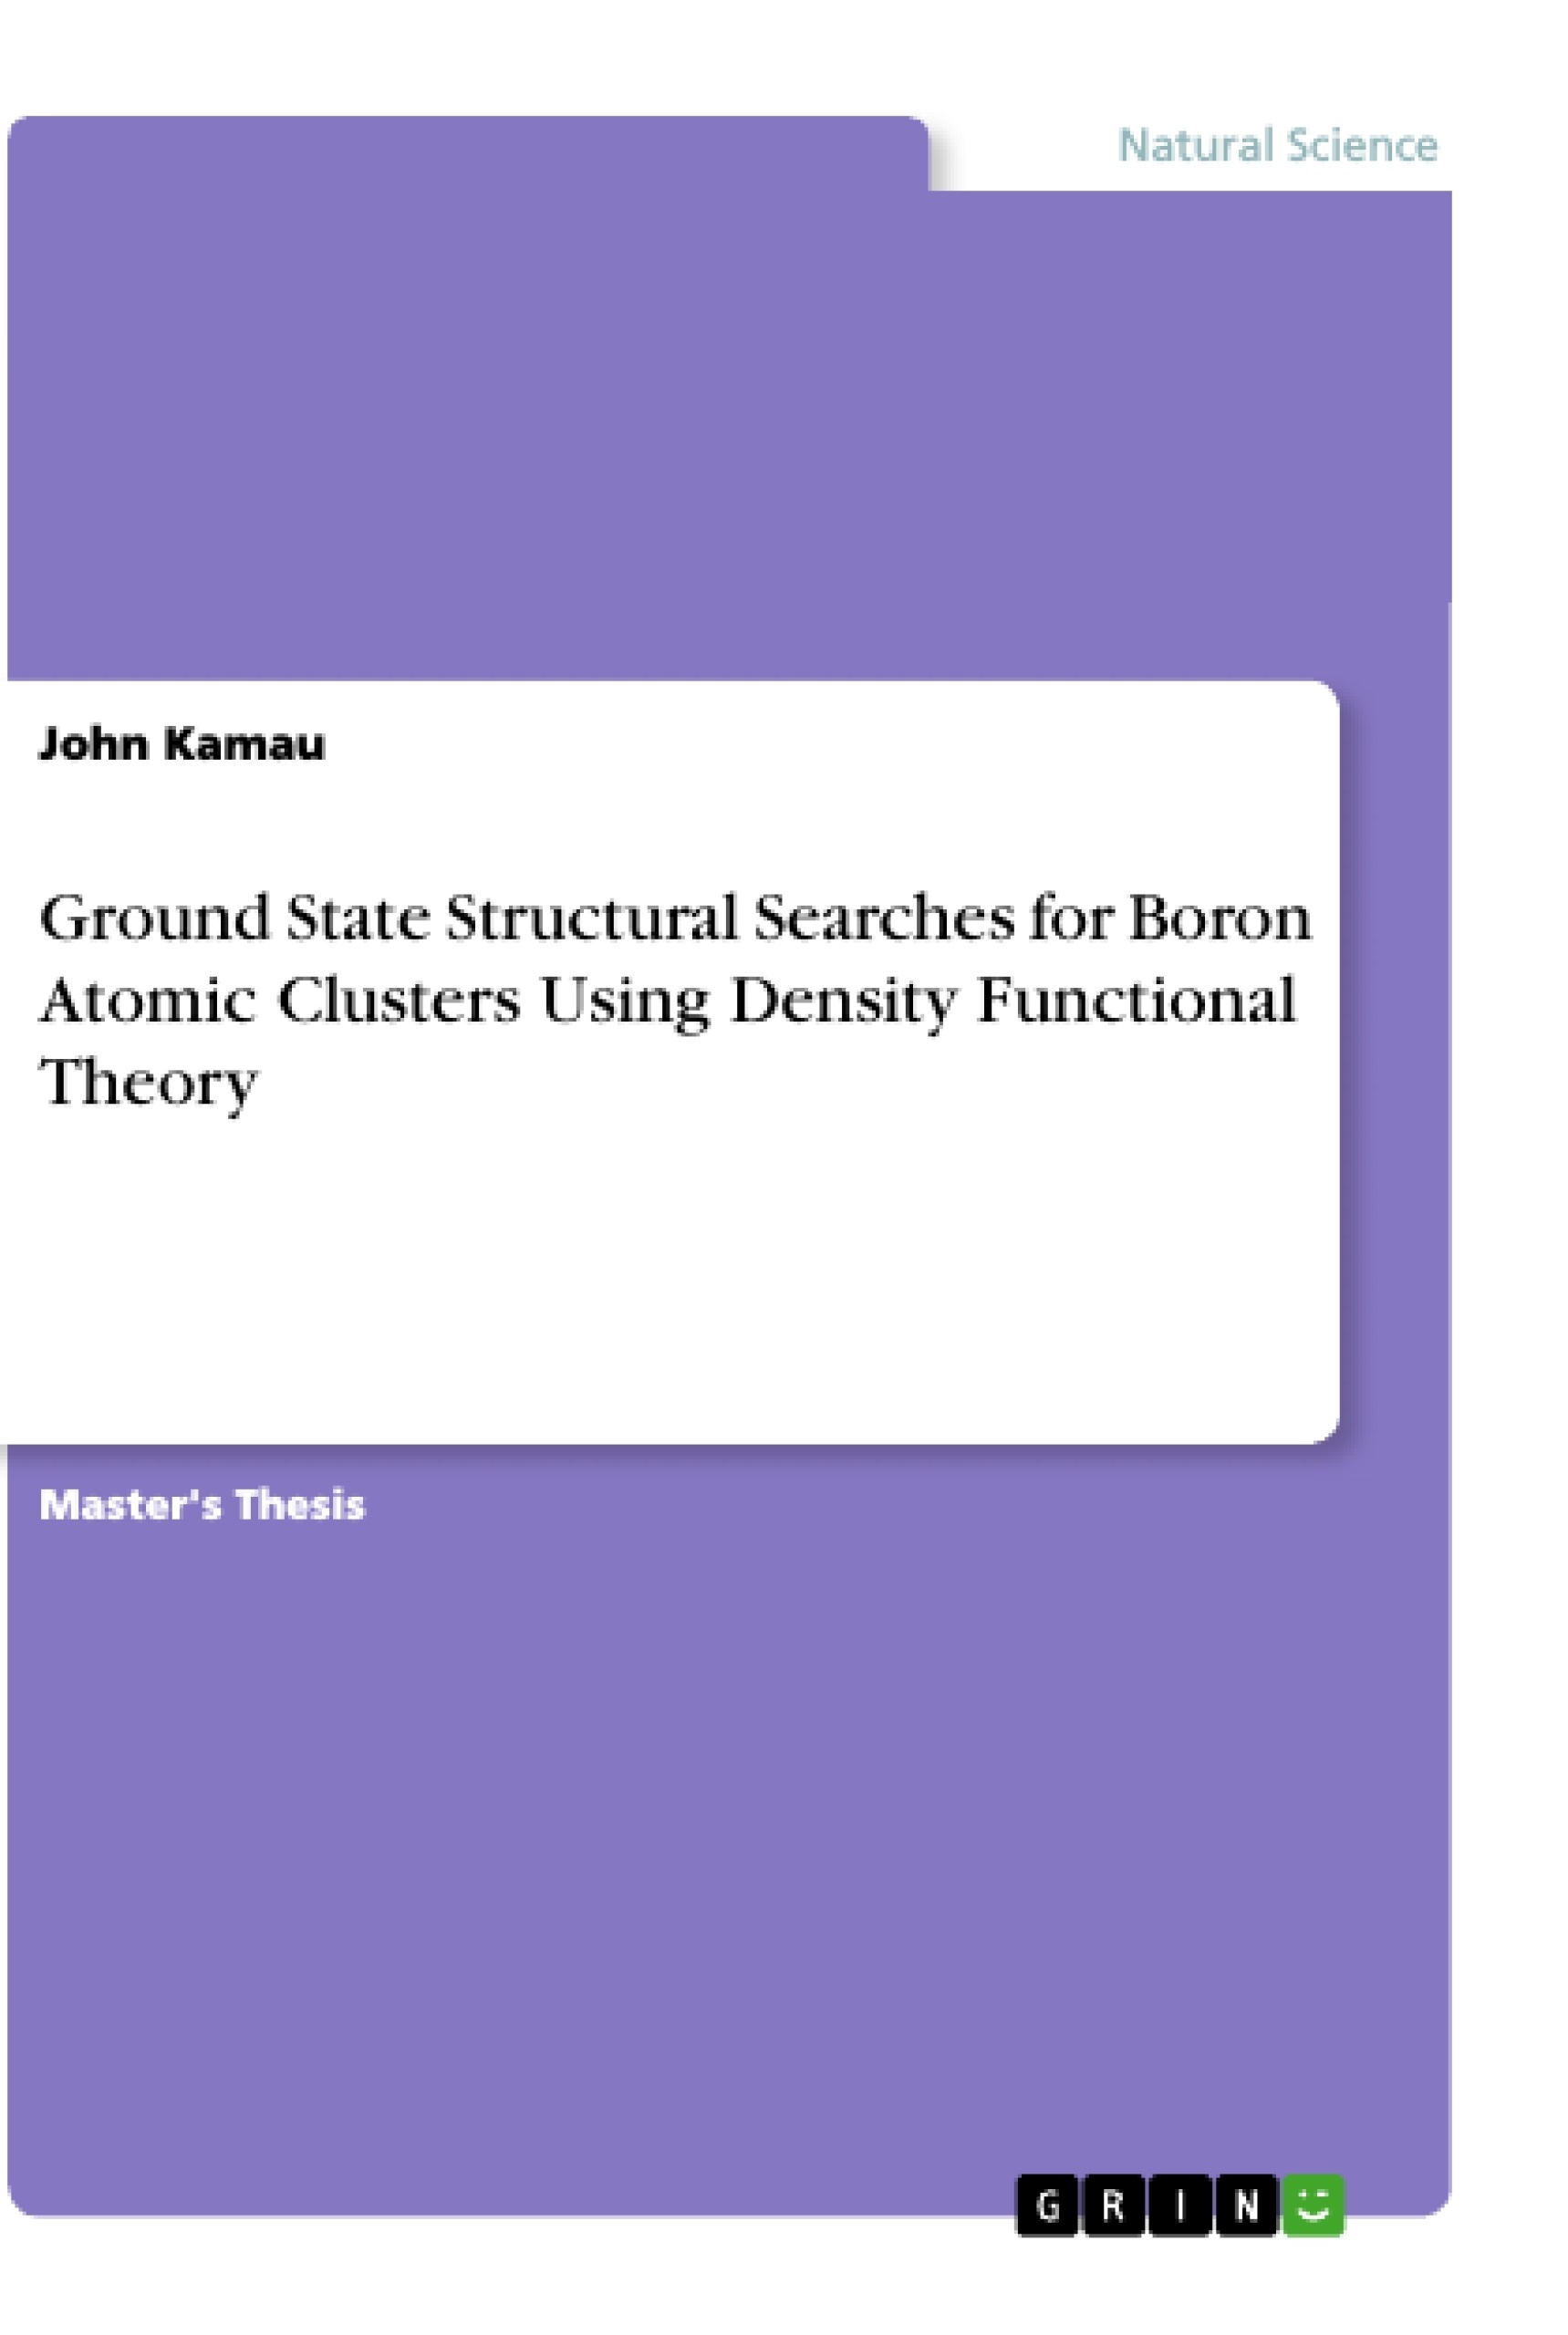 Title: Ground State Structural Searches for Boron Atomic Clusters Using Density Functional Theory